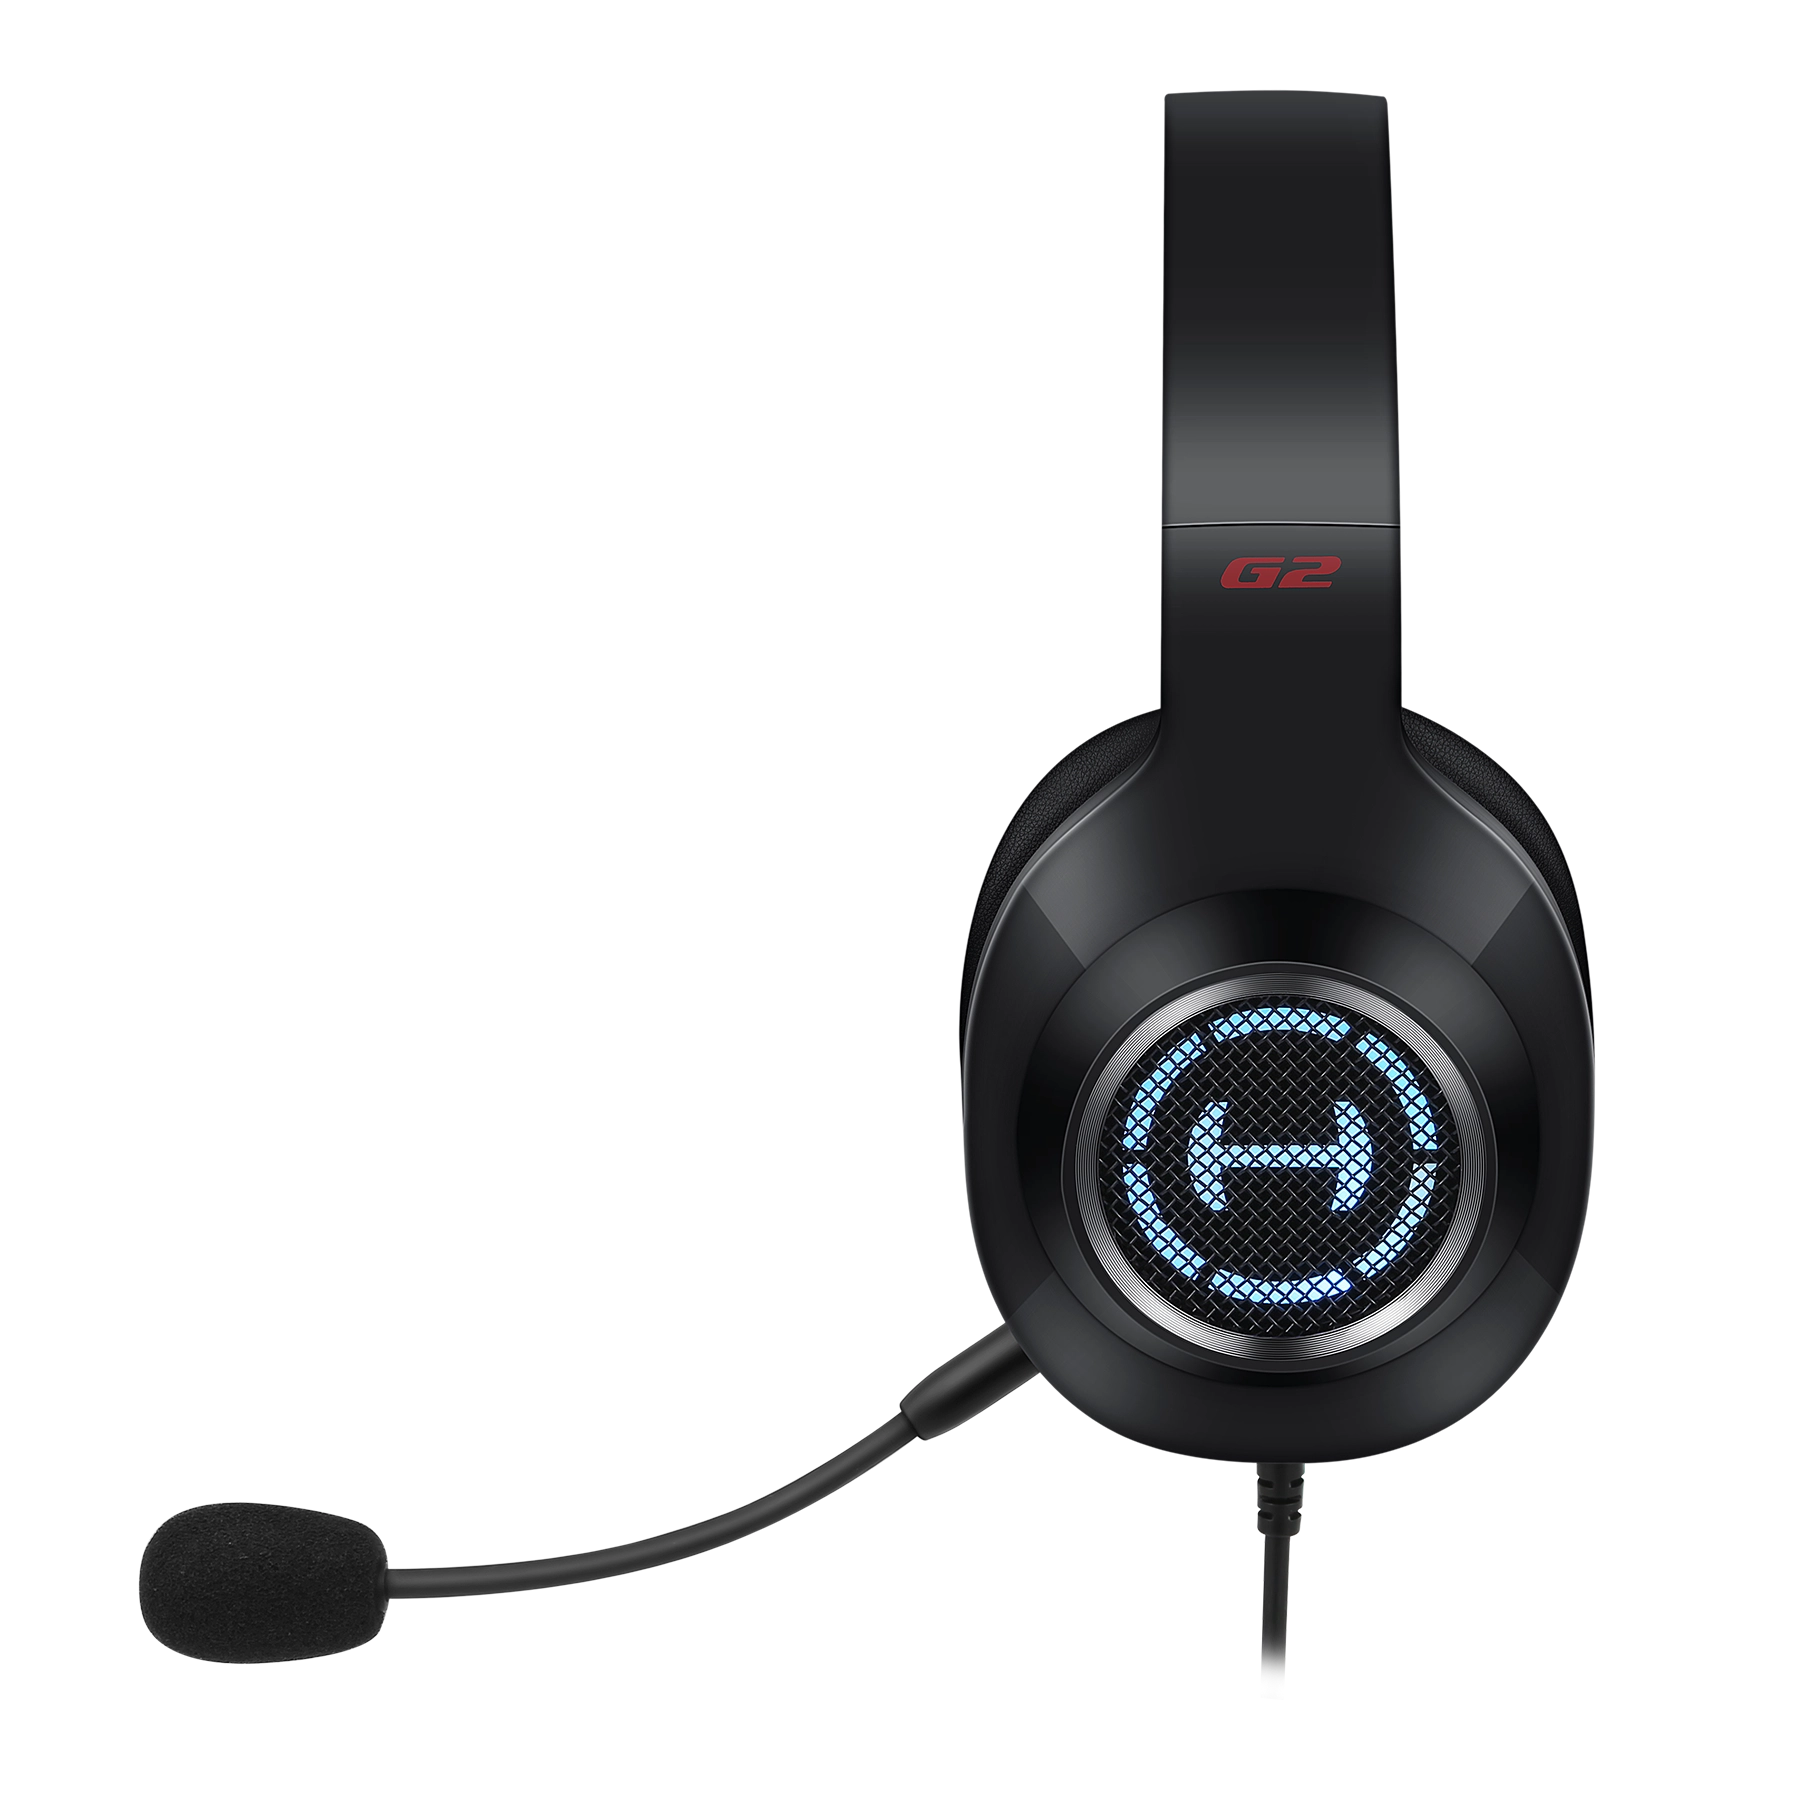 g2Ⅱ_headset product pictures black_